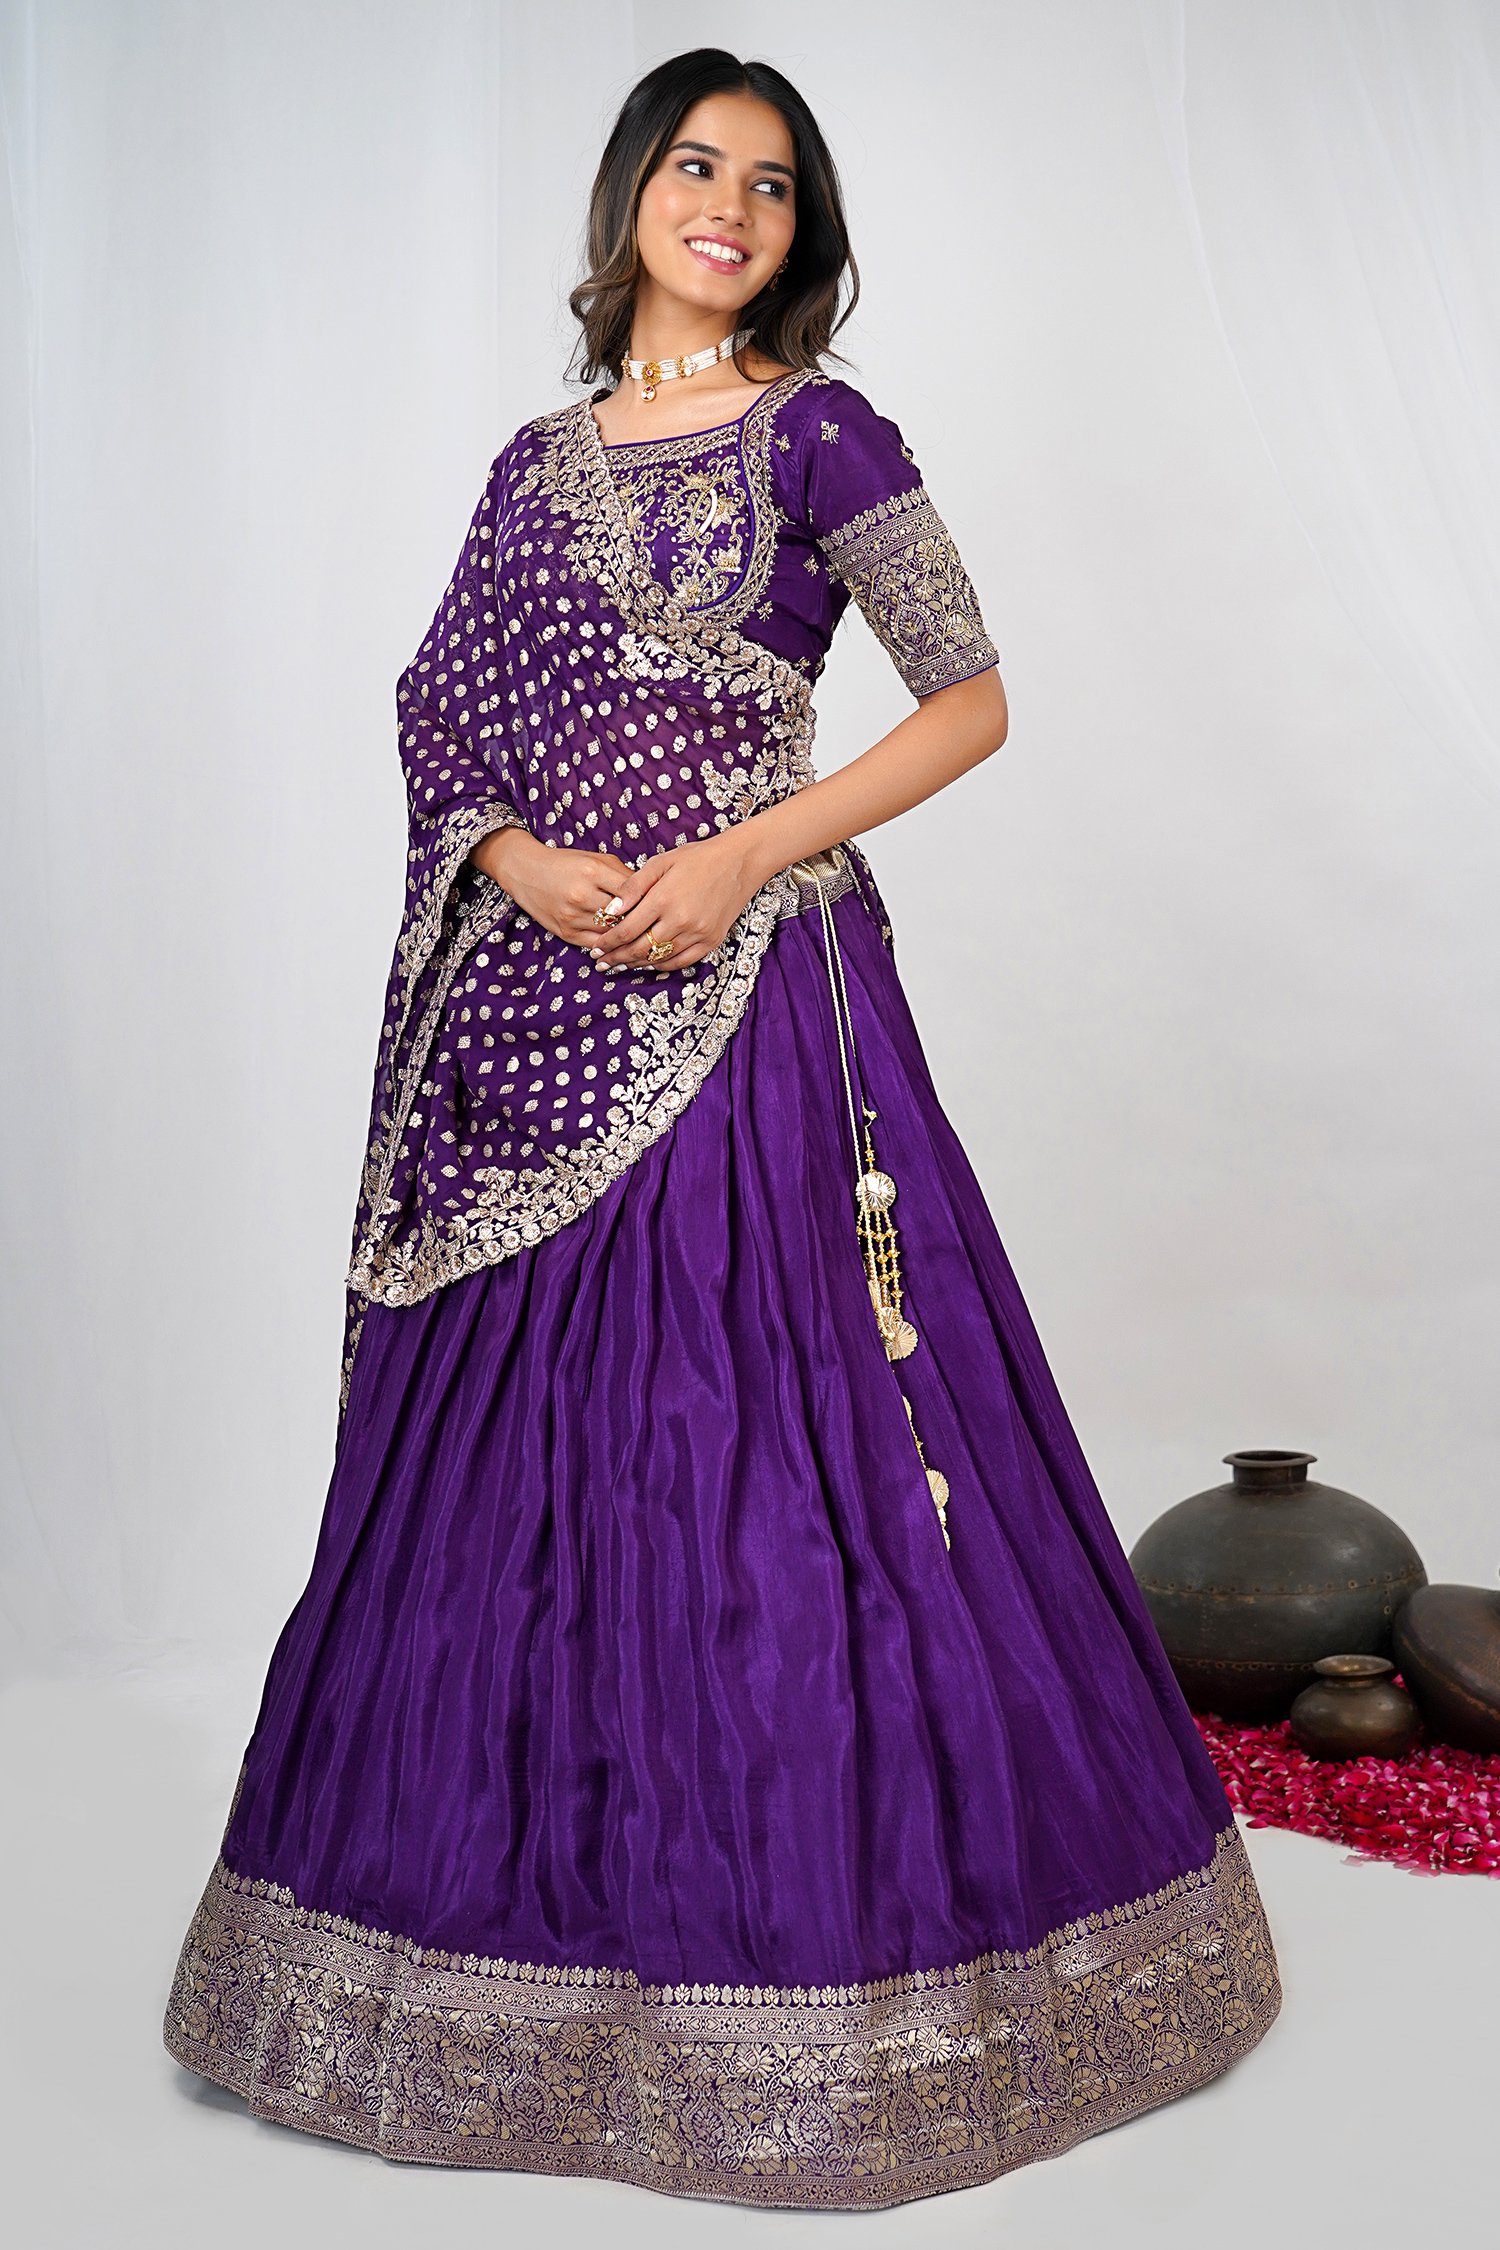 Customized Lehengas for Your Perfect Wedding Look